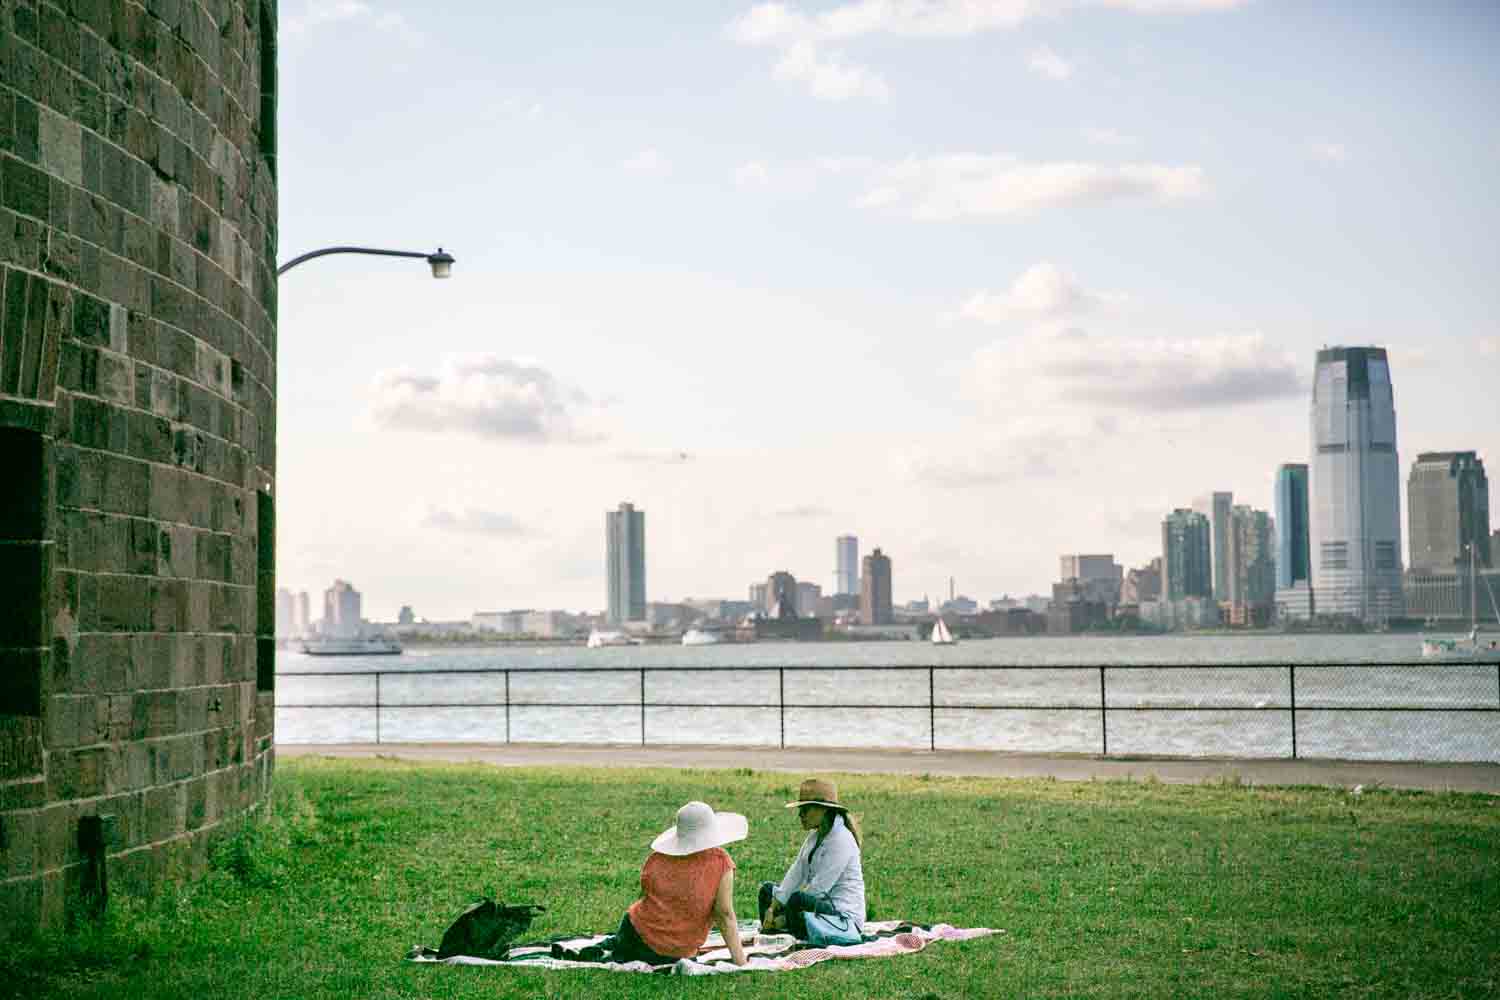 Governors Island photos of two women sitting in grass with NYC skyline in background